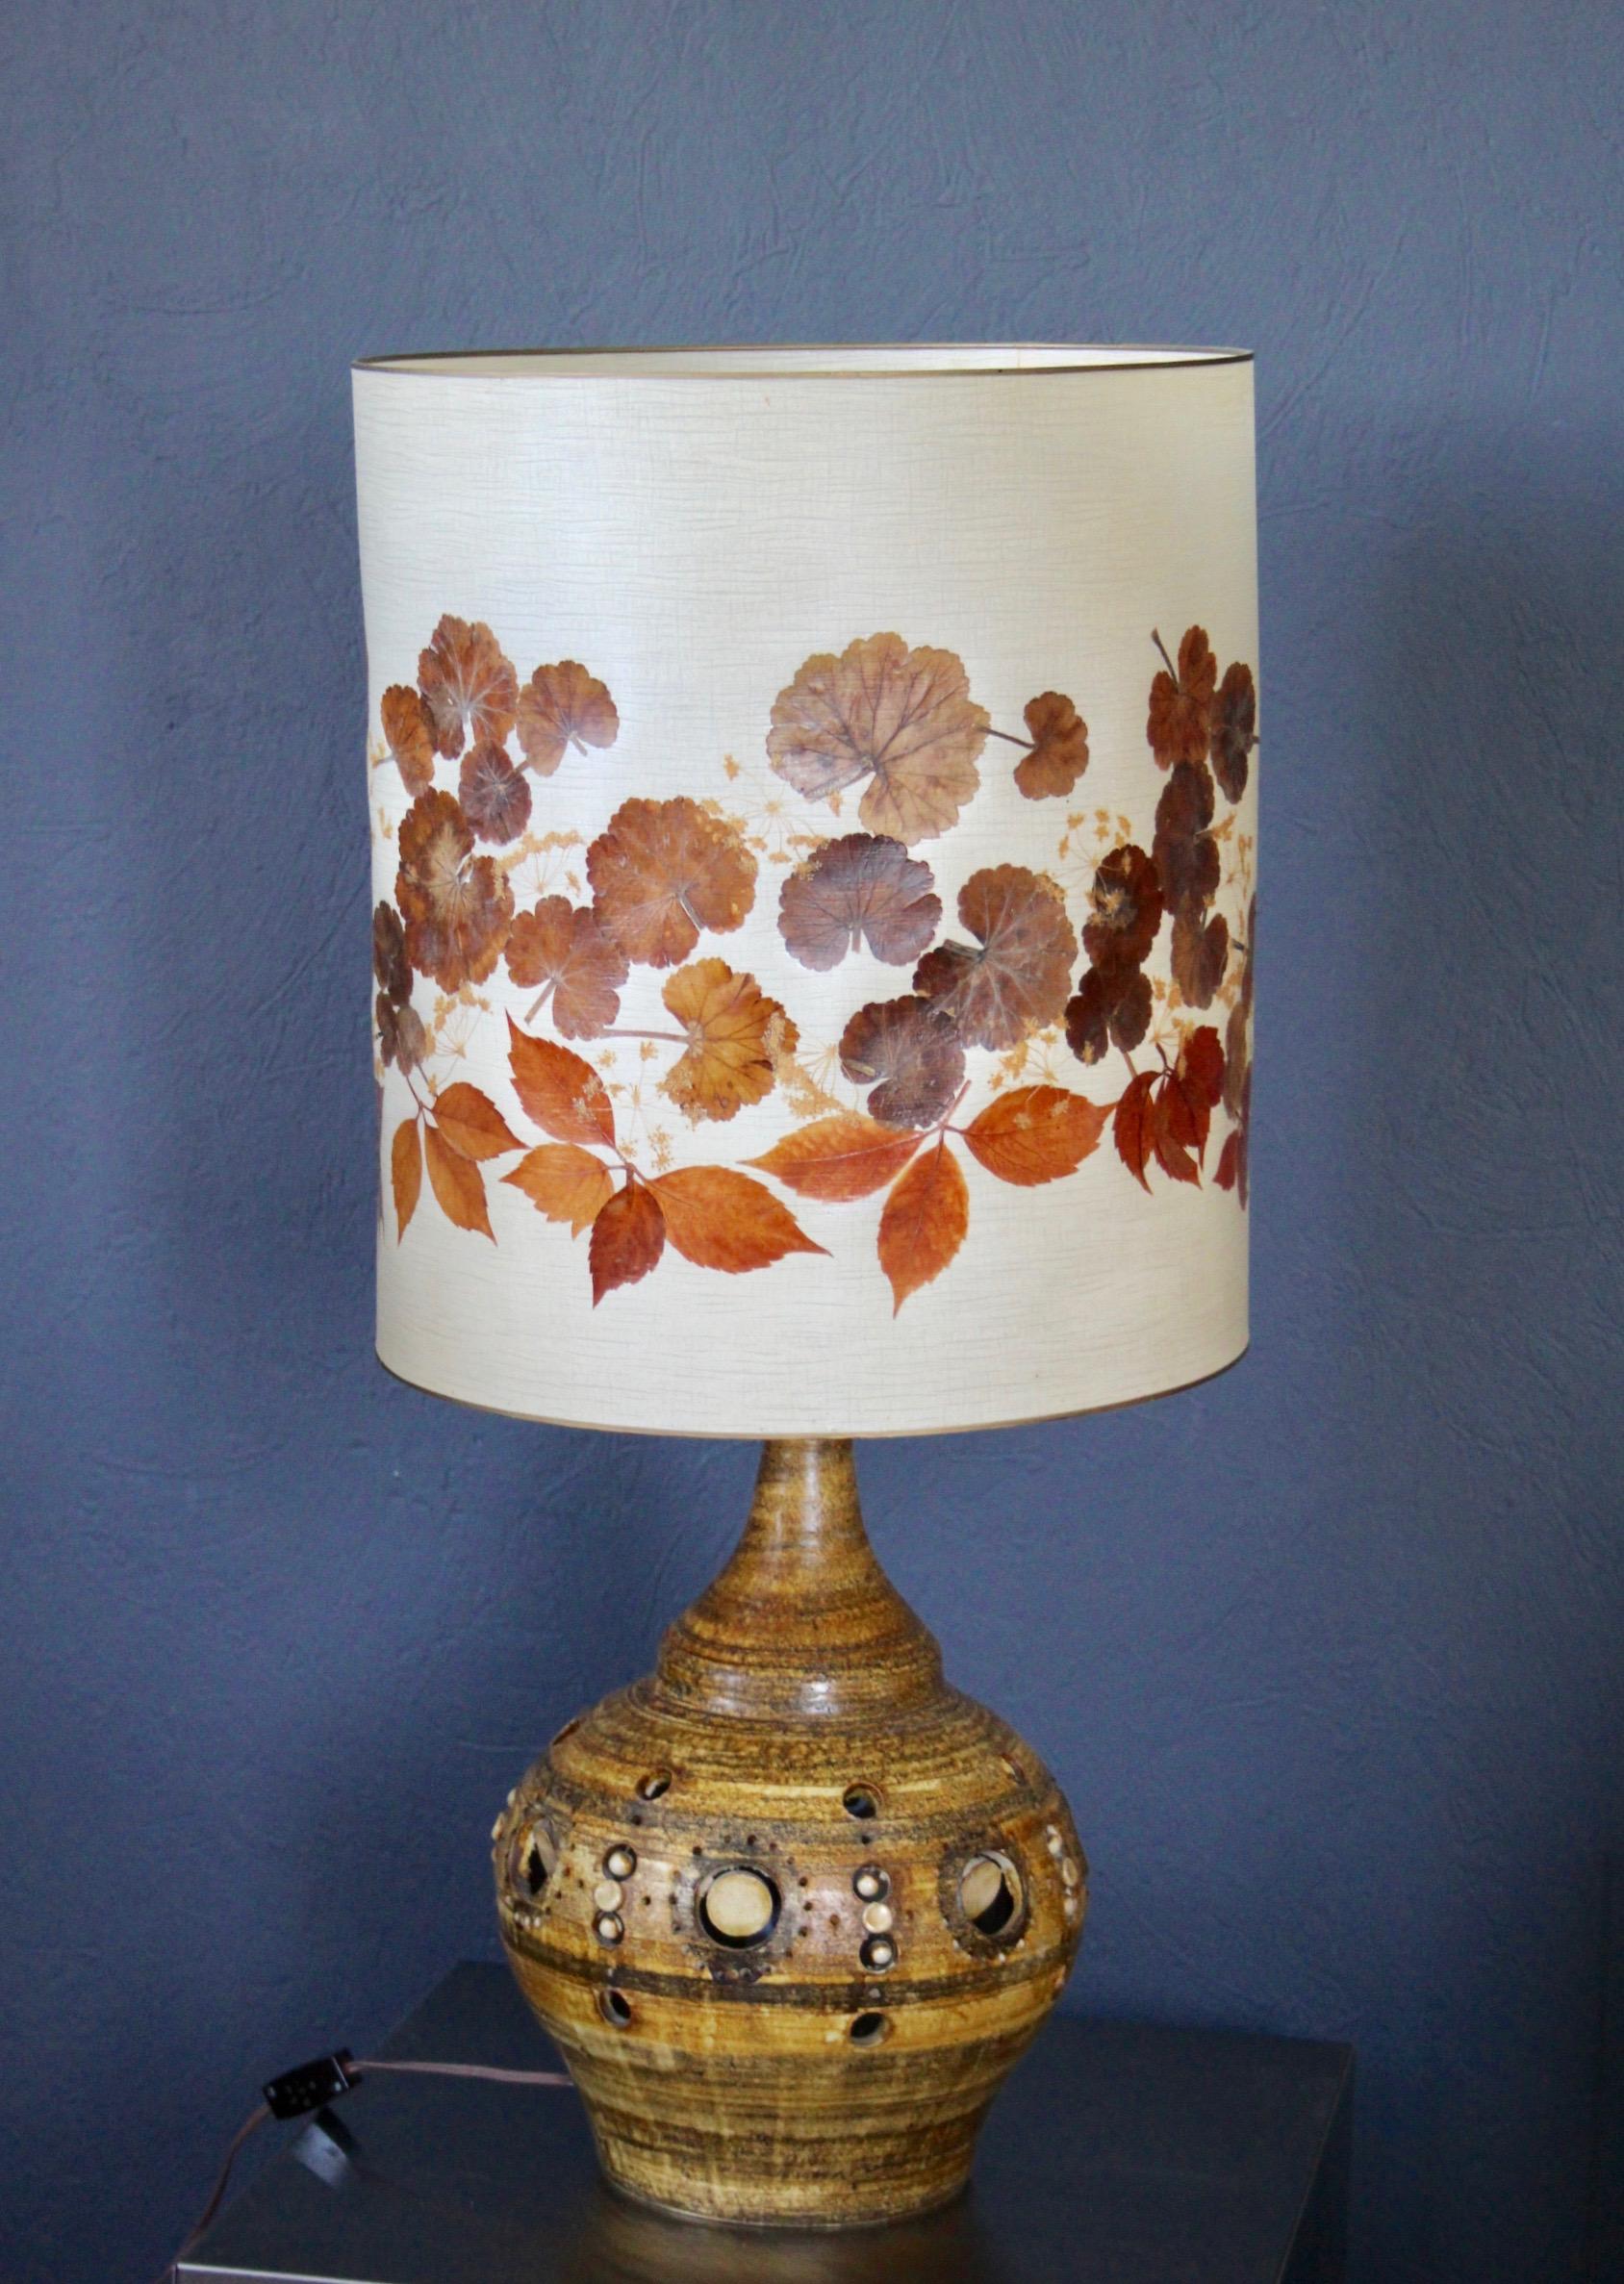 Double Lighting French Ceramic Lamp by Georges Pelletier, 1970s, with original shade, dimensions with out shade H 44 cm by Diam 30 cm.